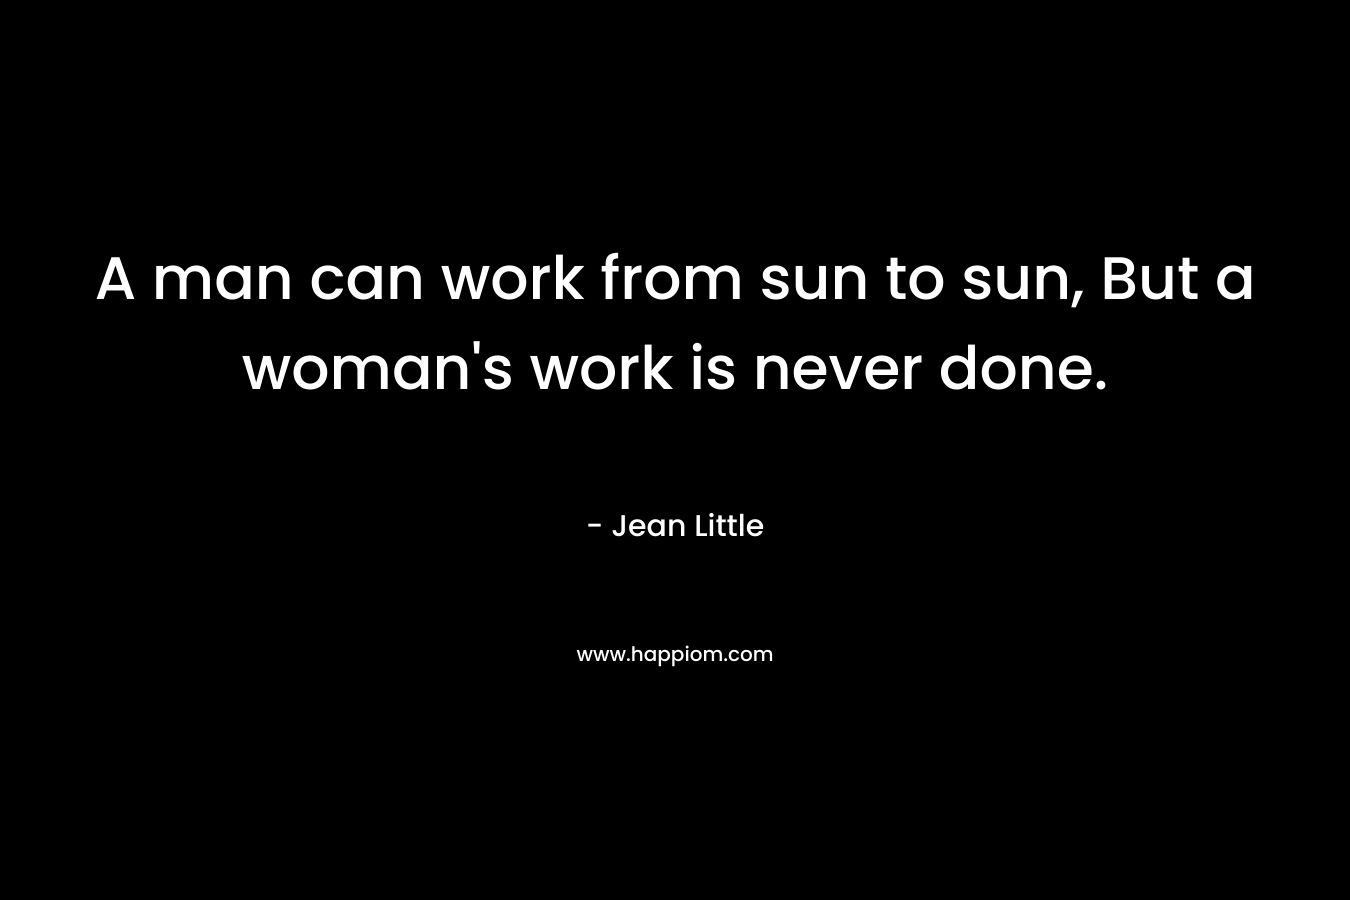 A man can work from sun to sun, But a woman's work is never done.